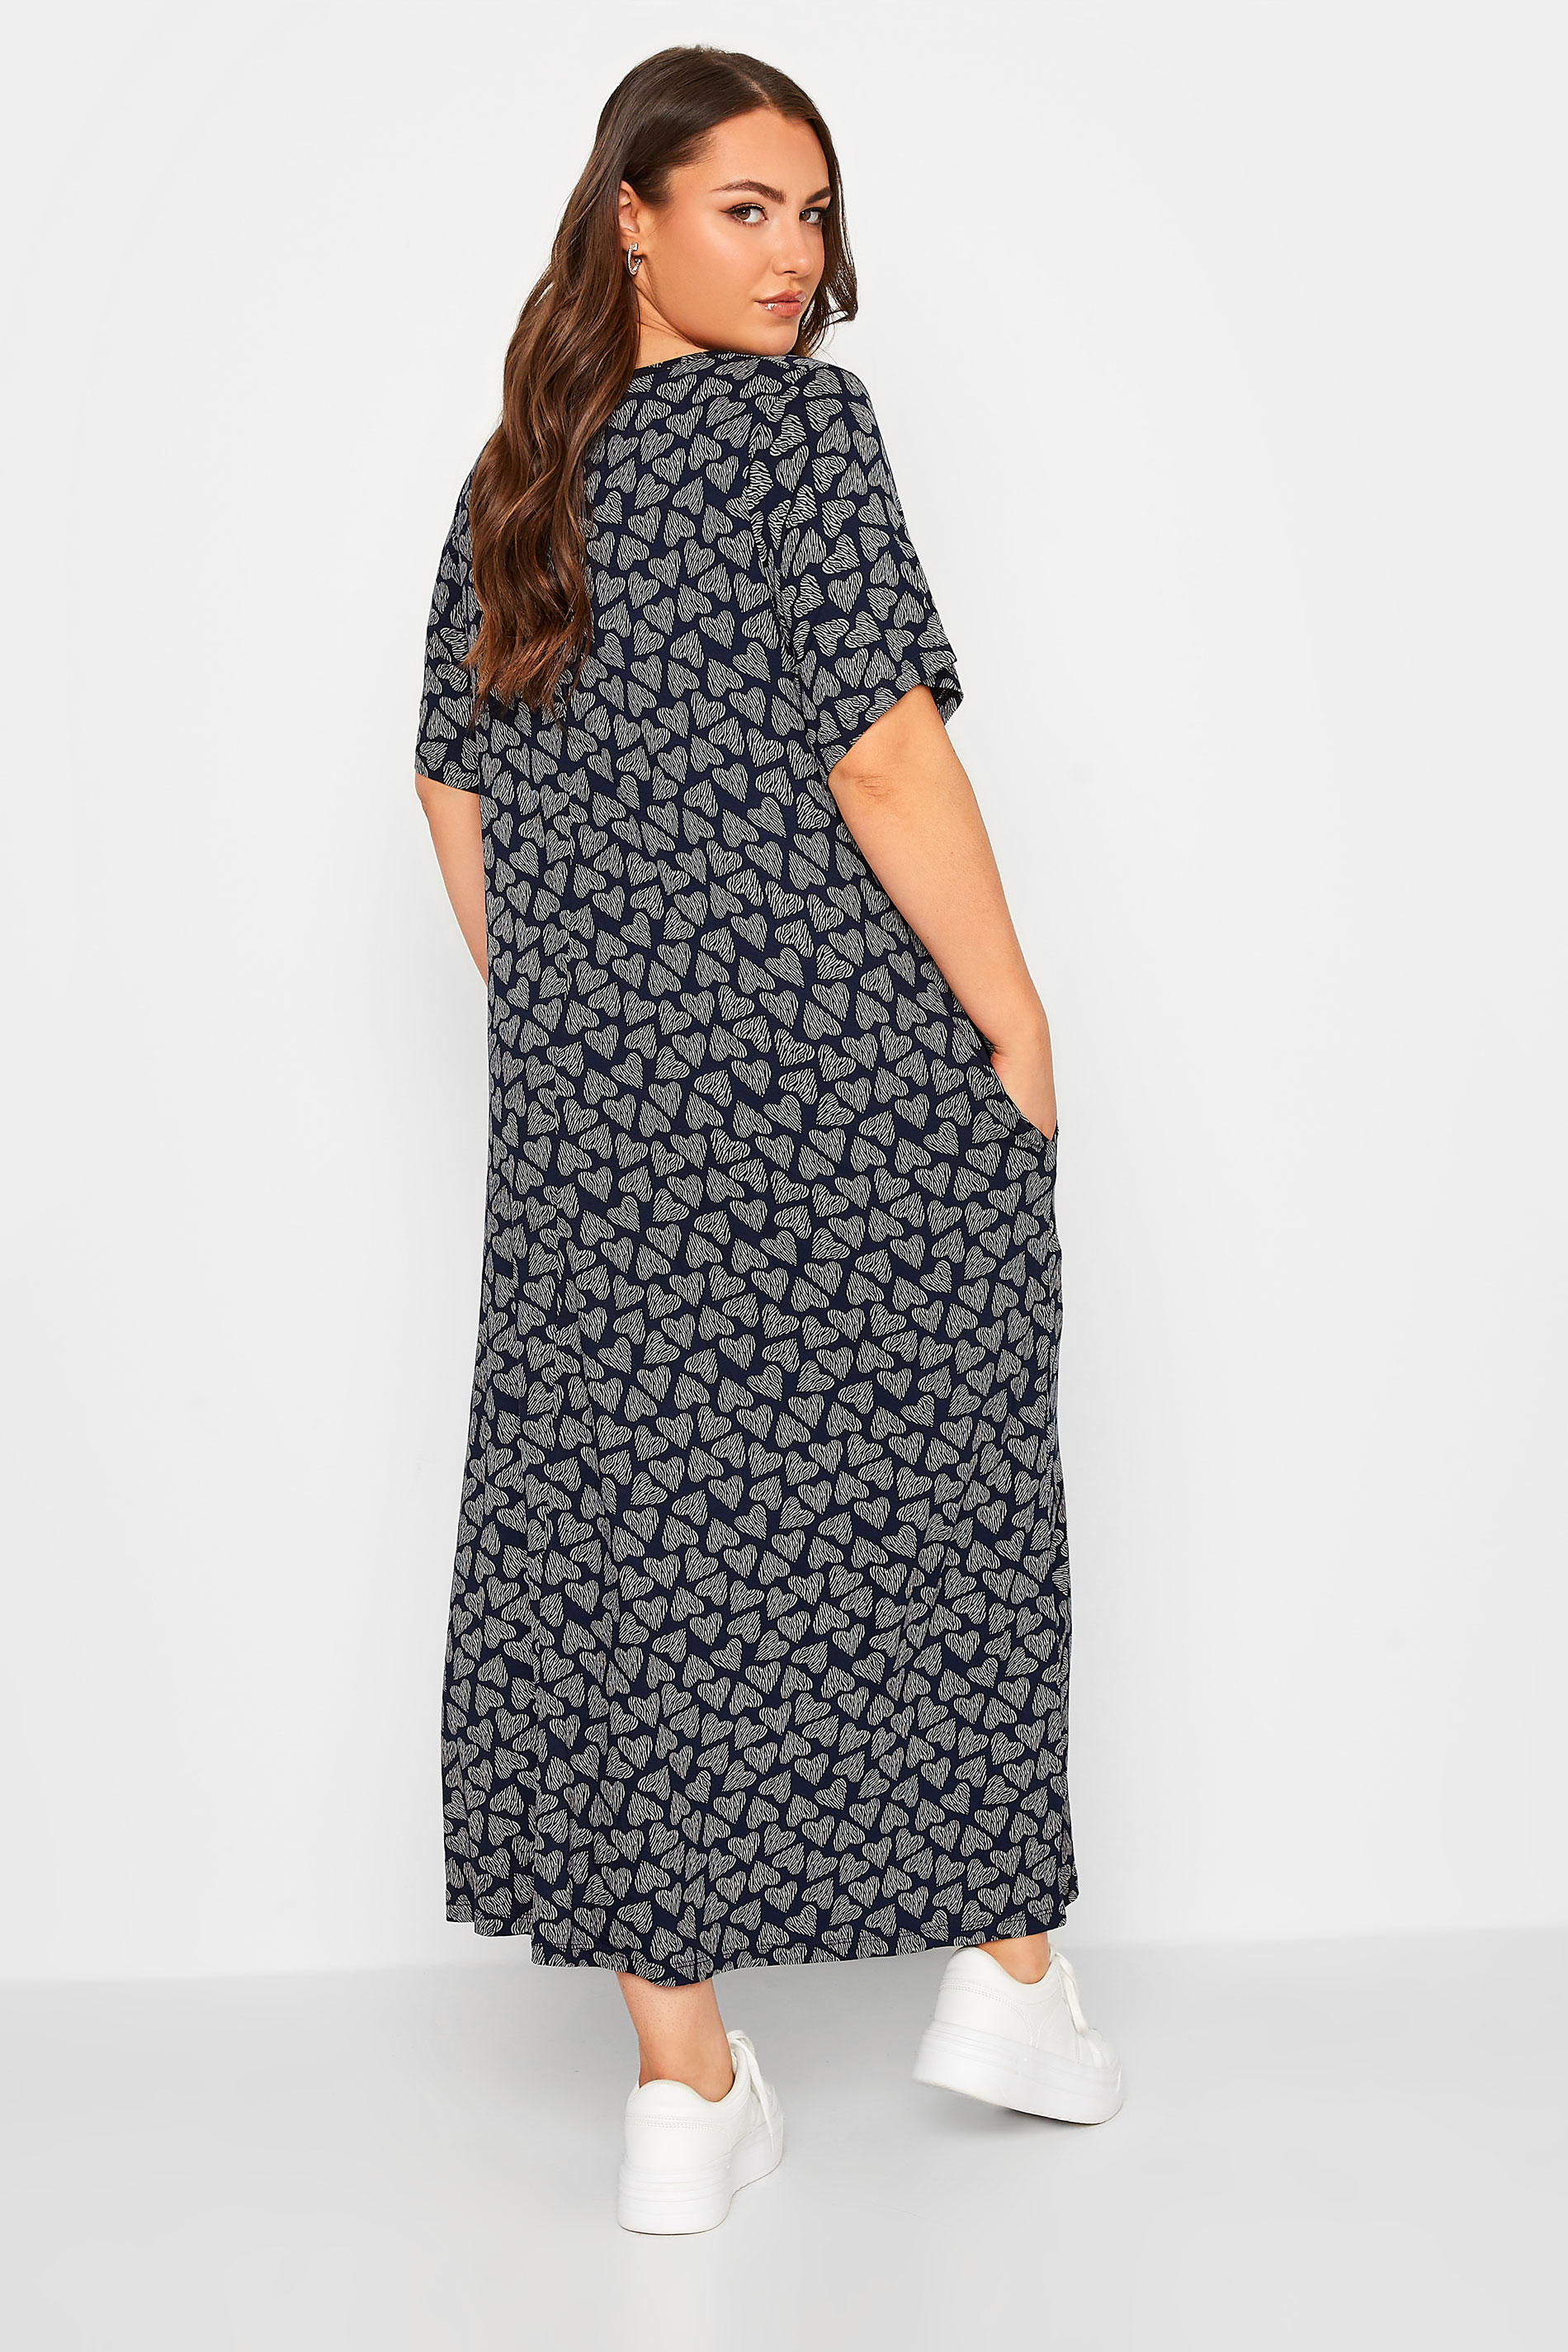 YOURS Plus Size Navy Blue Heart Print Maxi Dress | Yours Clothing 3